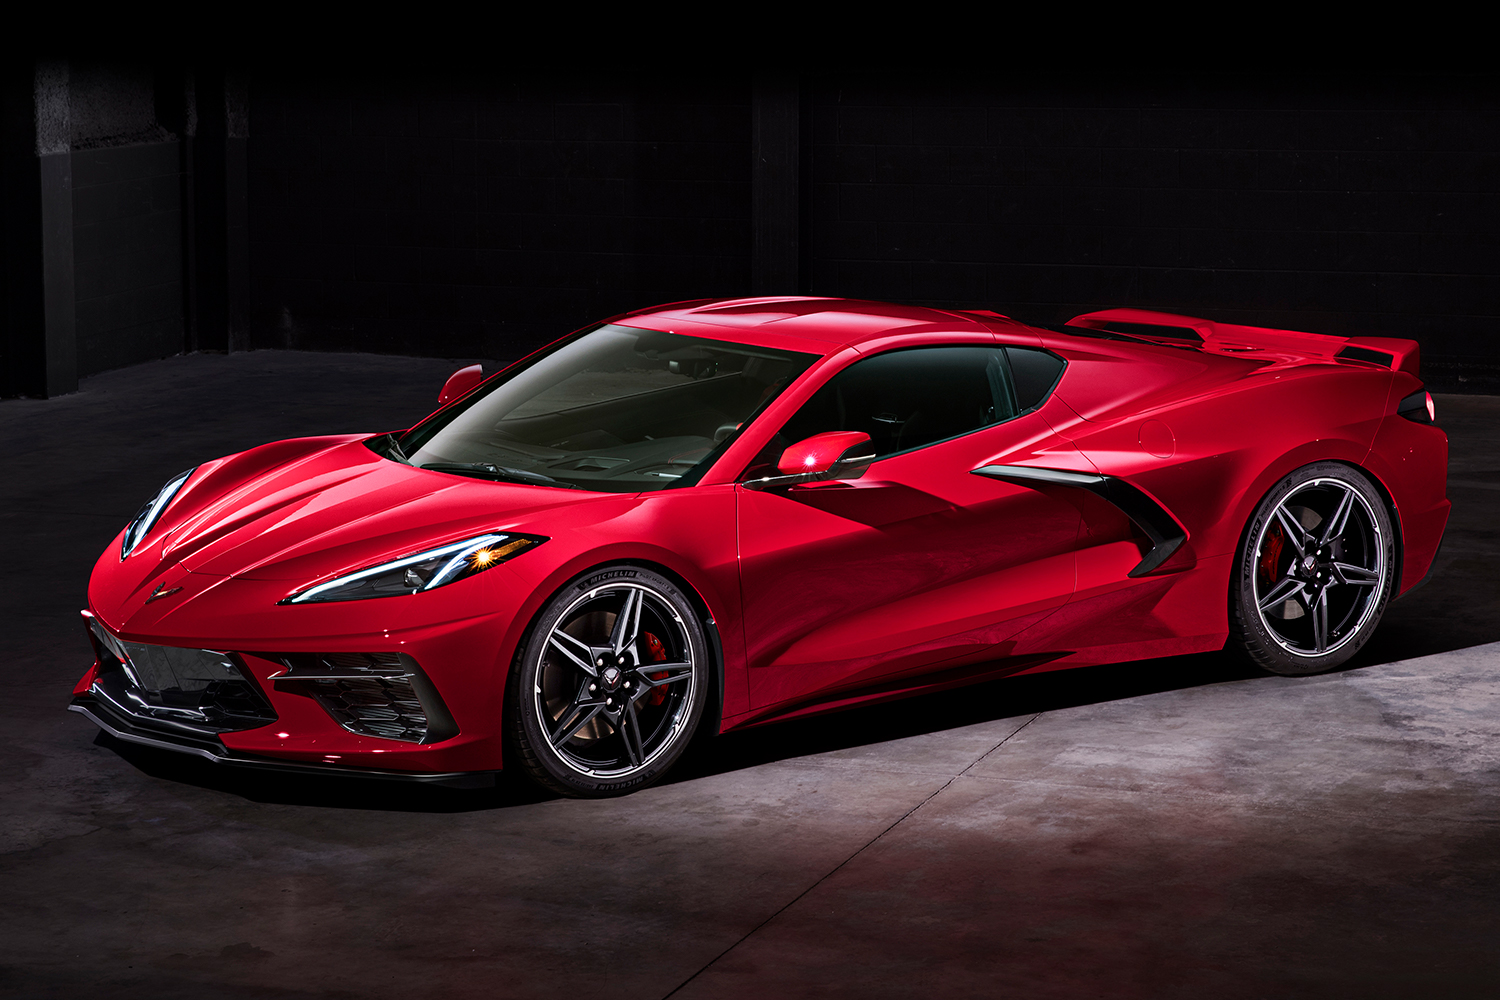 2020 Chevrolet Corvette Stingray C8 Everything You Need to Know